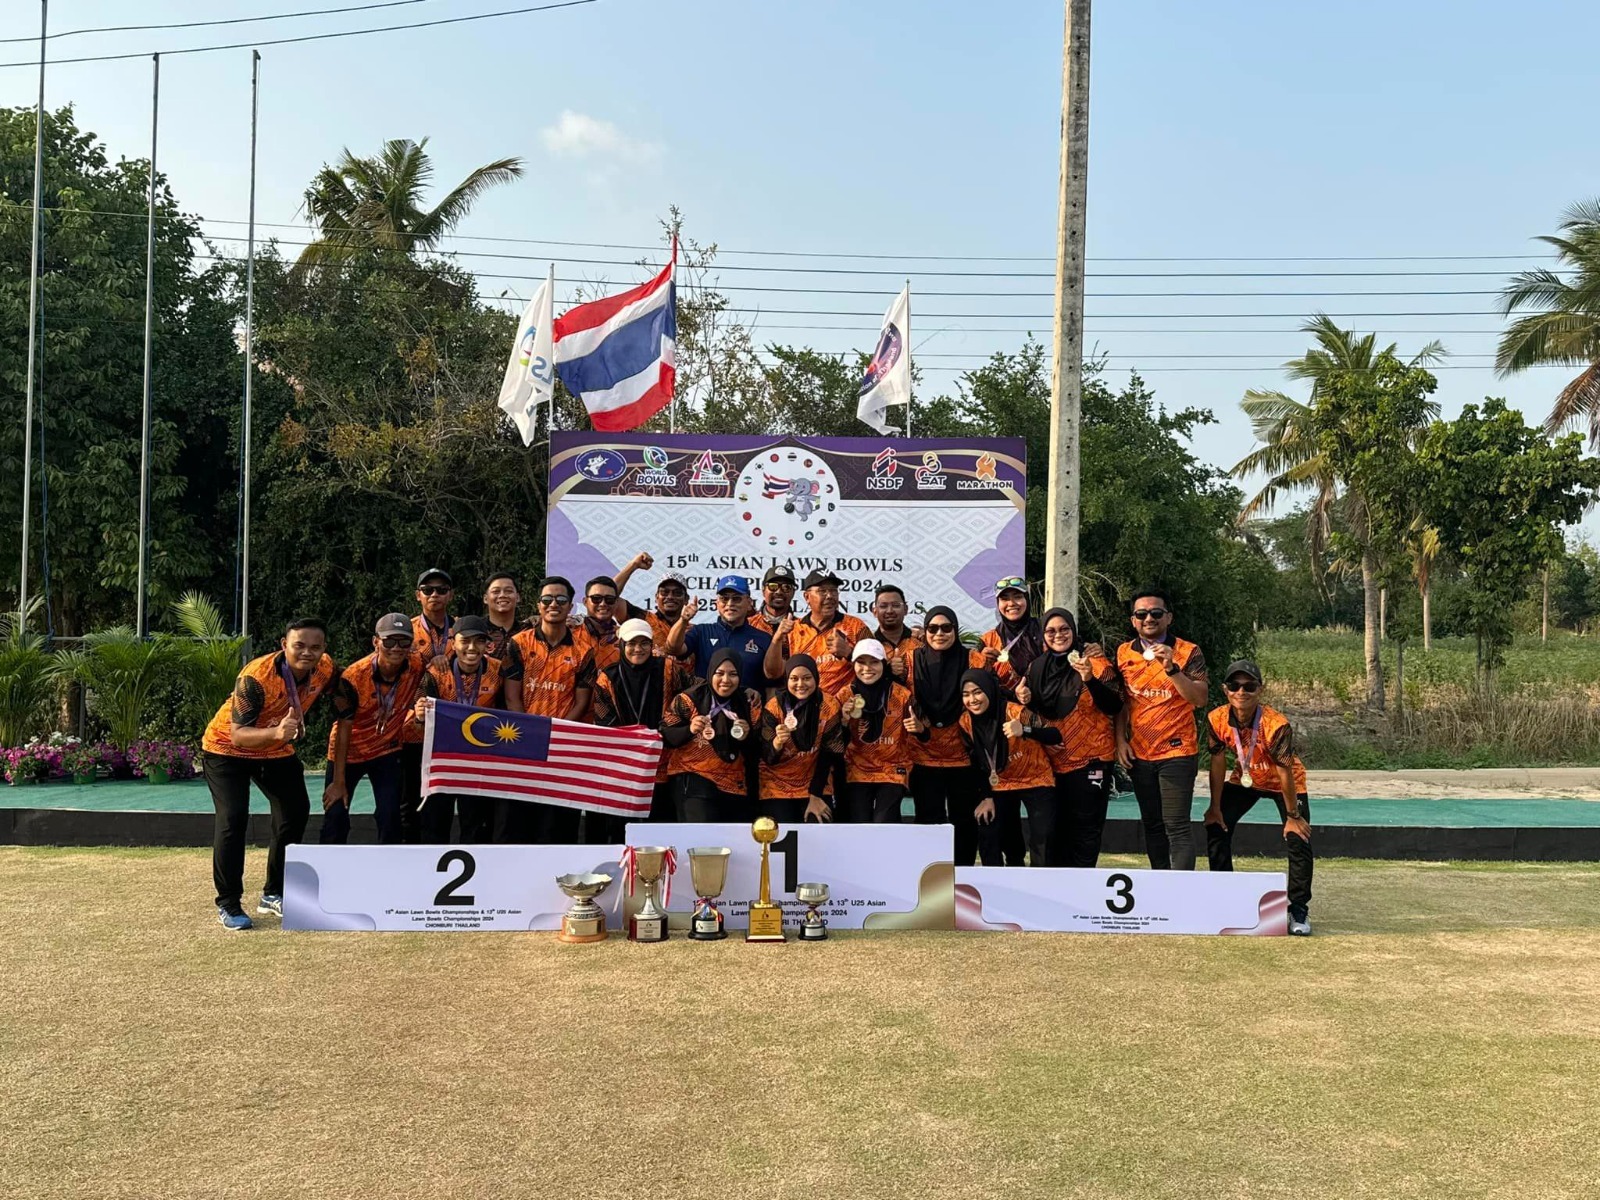 Malaysia's lawn bowlers triumph in tough Pattaya conditions, bag three golds in Asian Championship